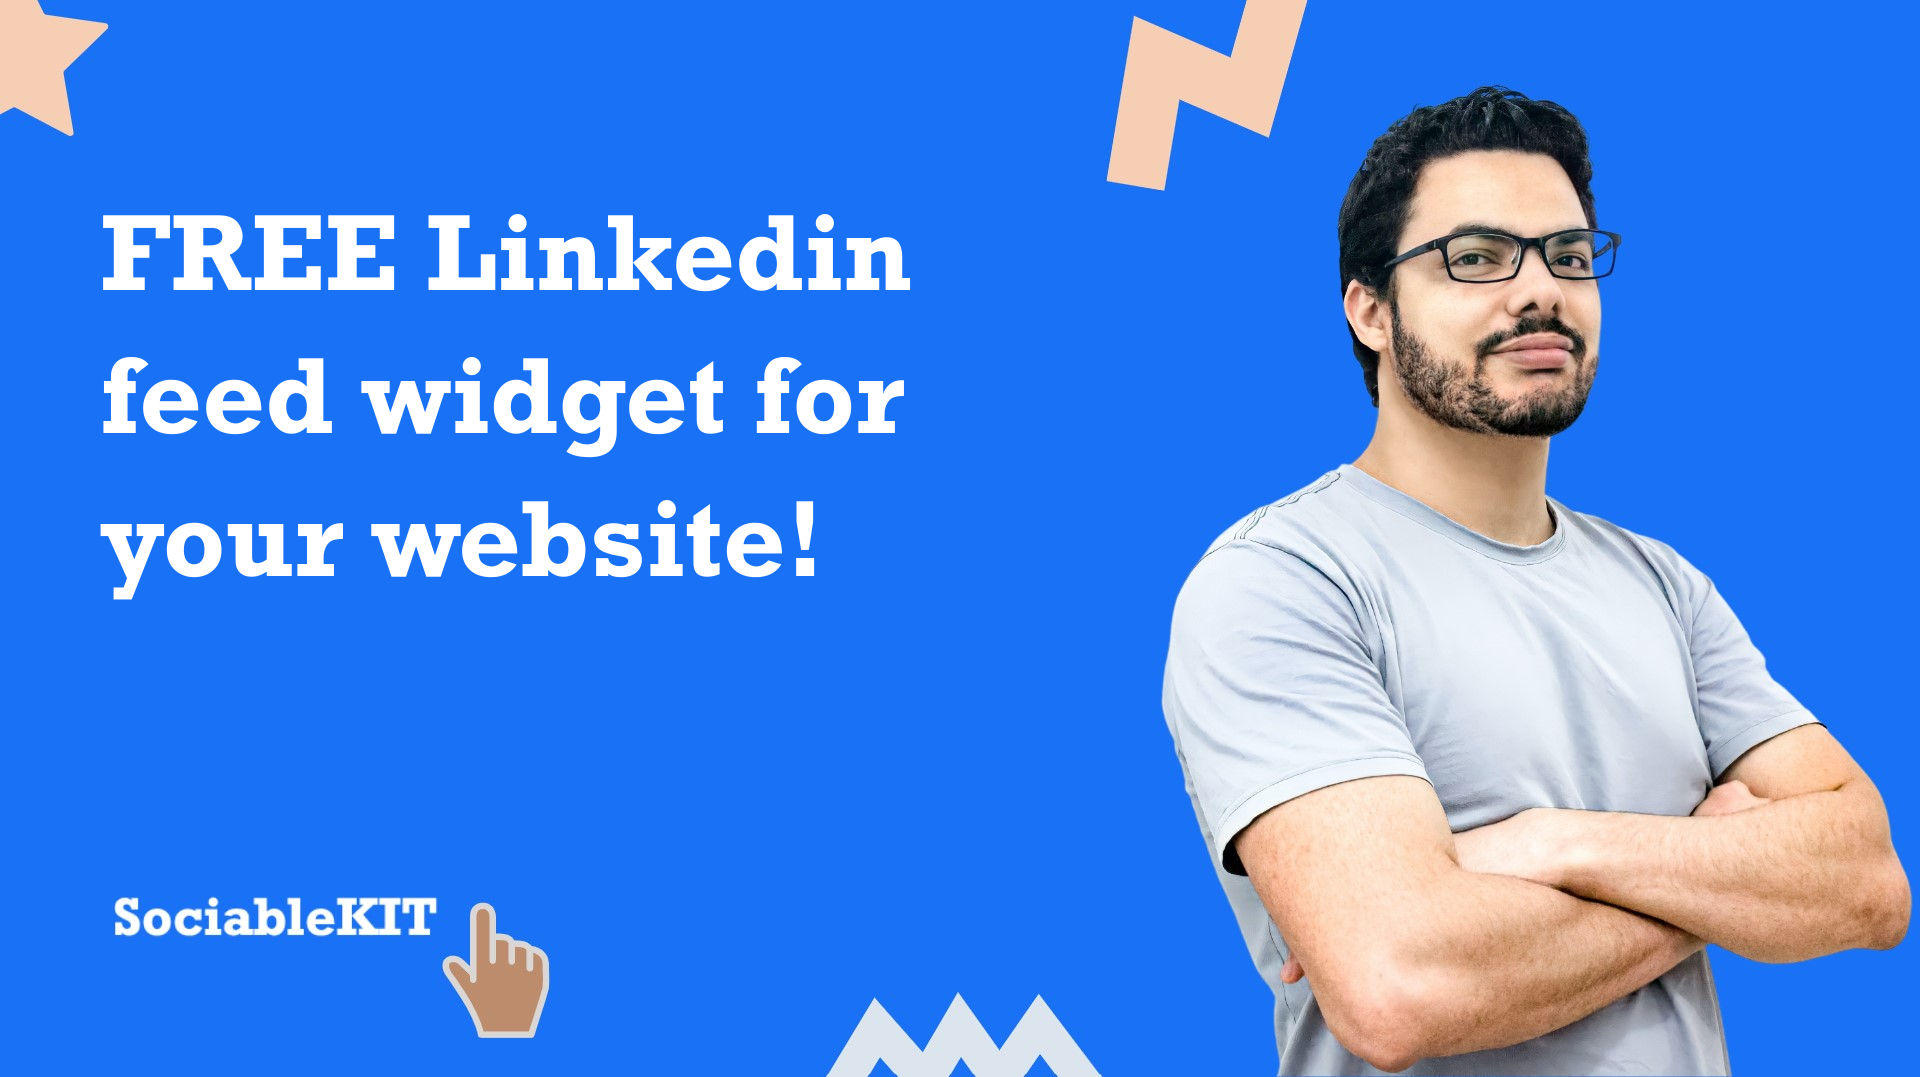 Free Linkedin feed widget for your website